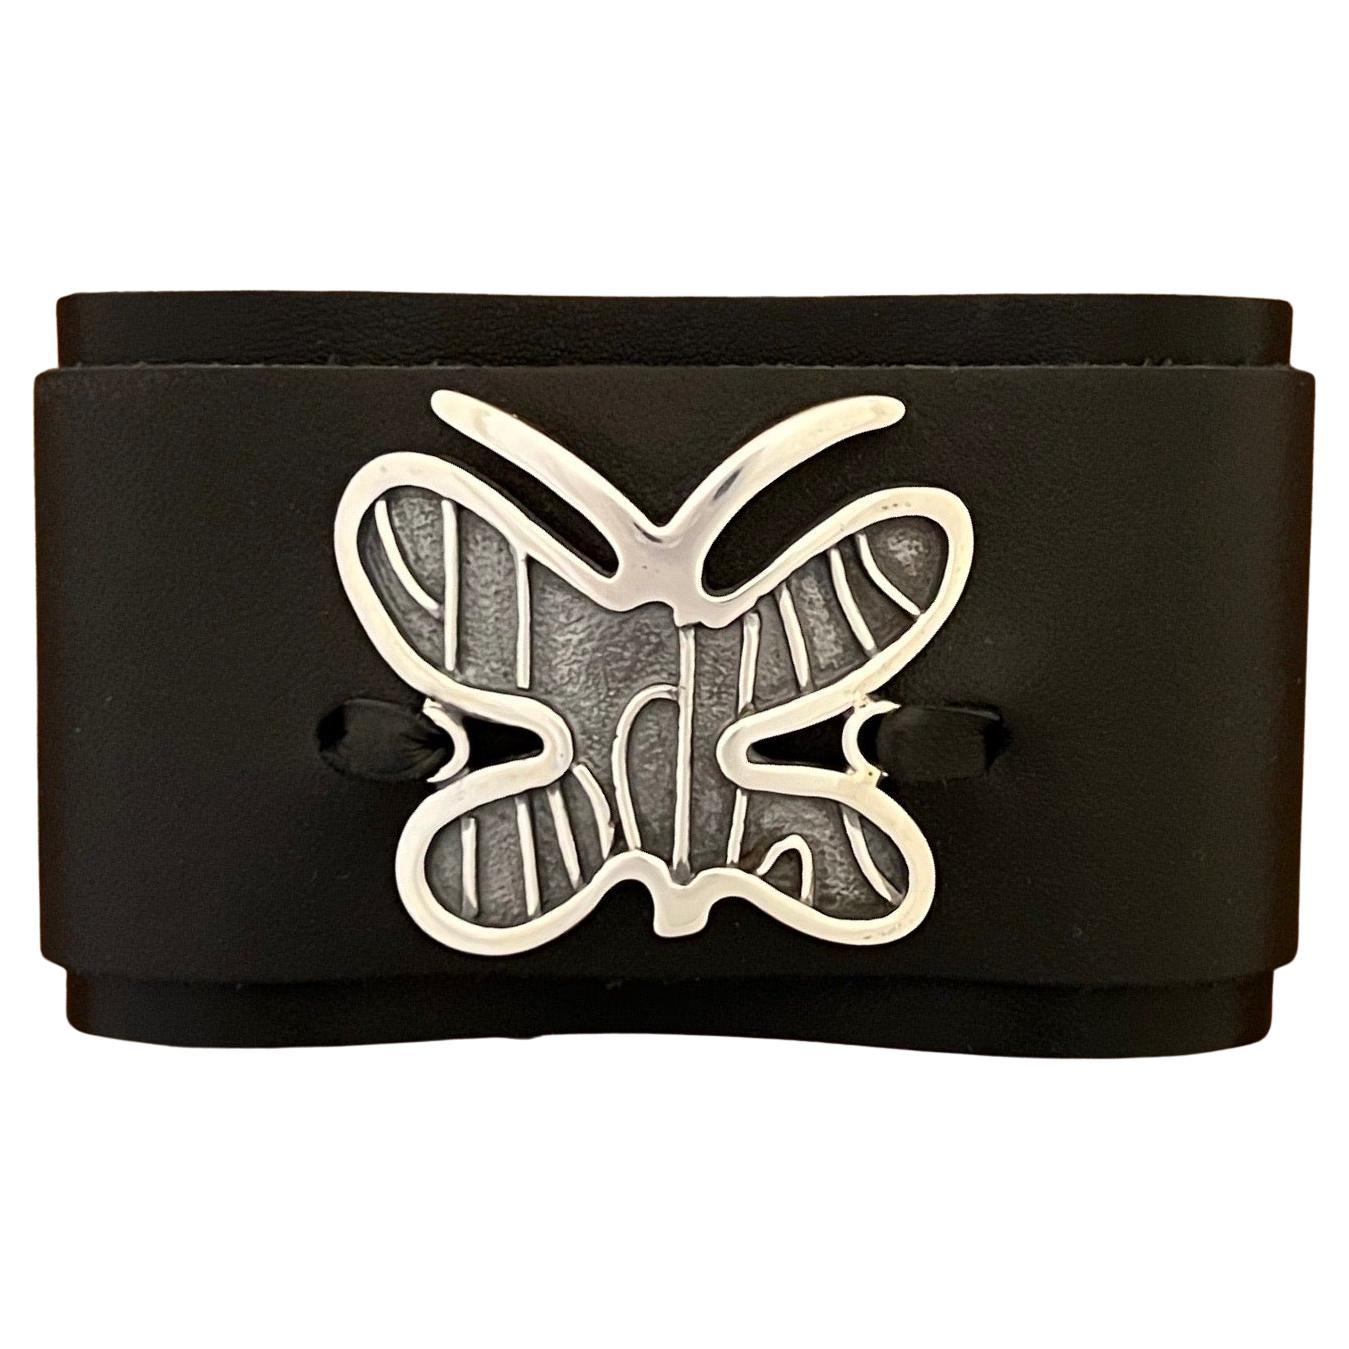 Adjustable Butterfly leather cuff by Melanie Yazzie black silver

Melanie A. Yazzie (Navajo-Diné) is a highly regarded multimedia artist known for her printmaking, paintings, sculpture, and jewelry designs. She has exhibited, lectured, and taught